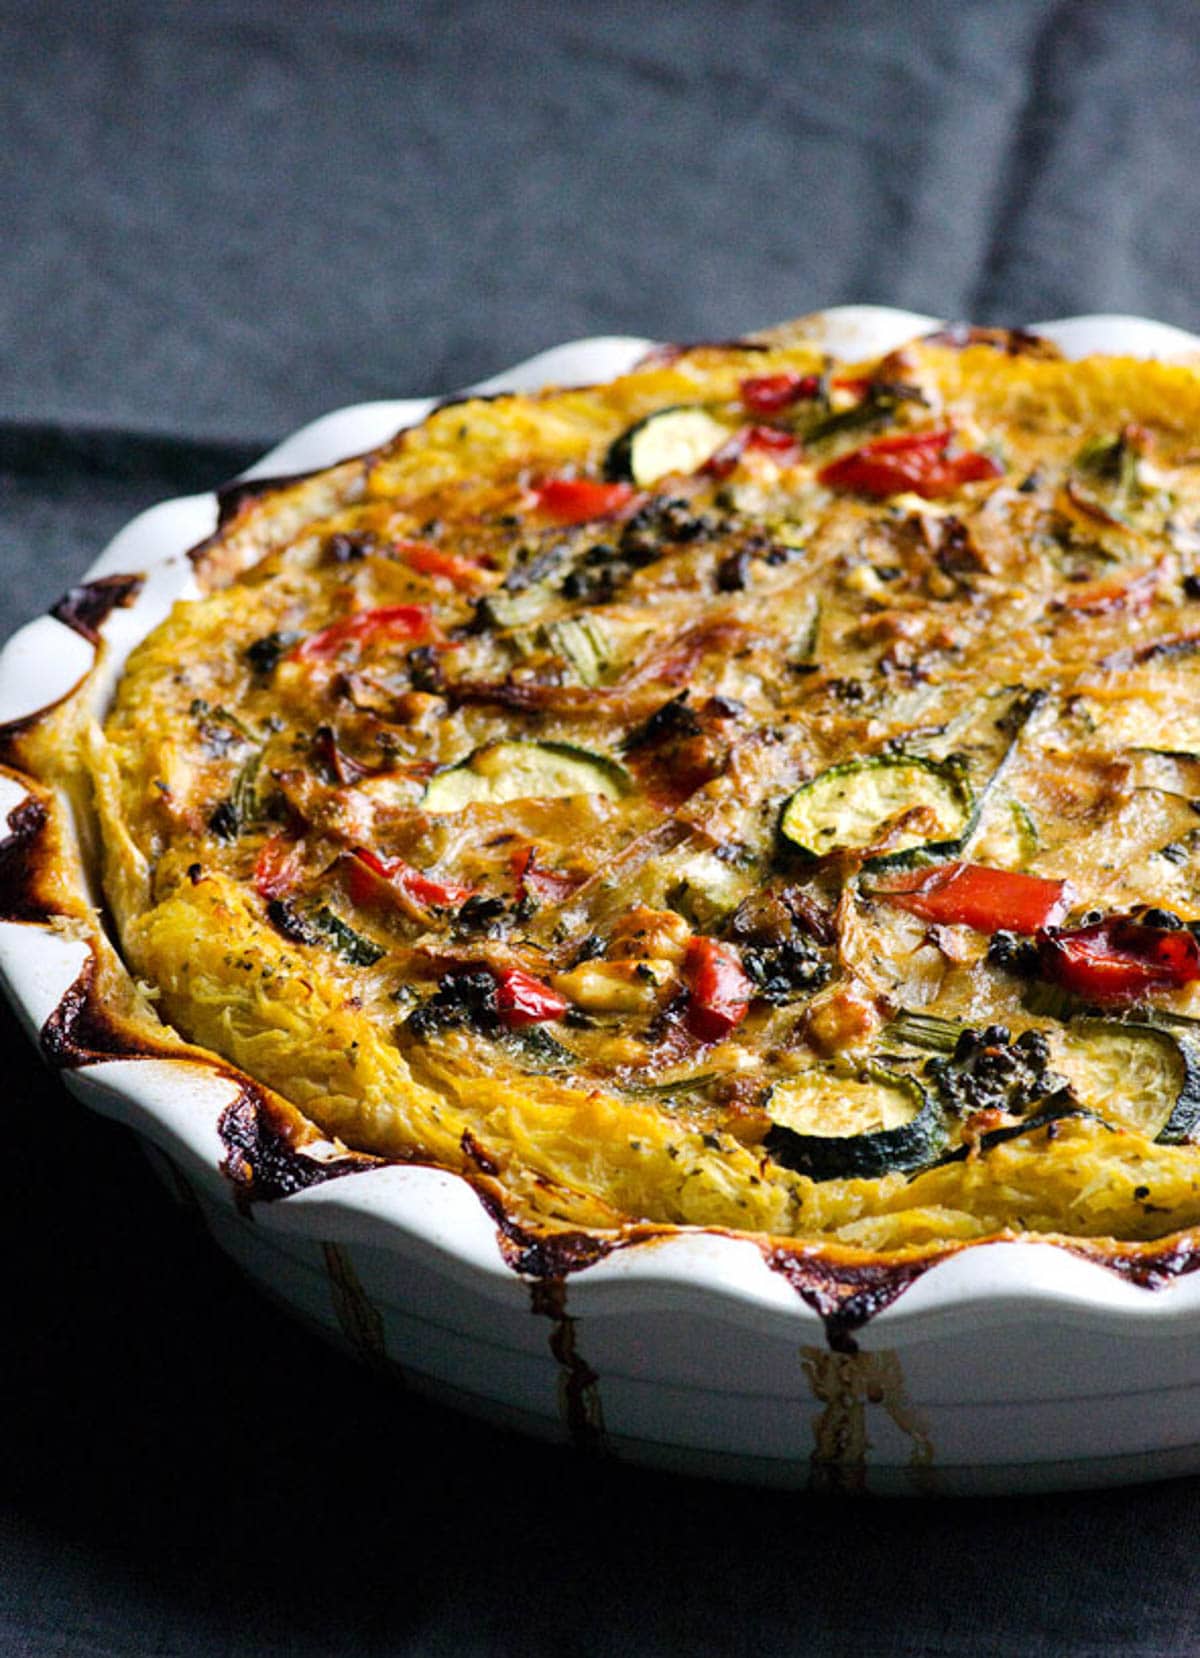 Spaghetti squash quiche with vegetables in a pie baking dish.